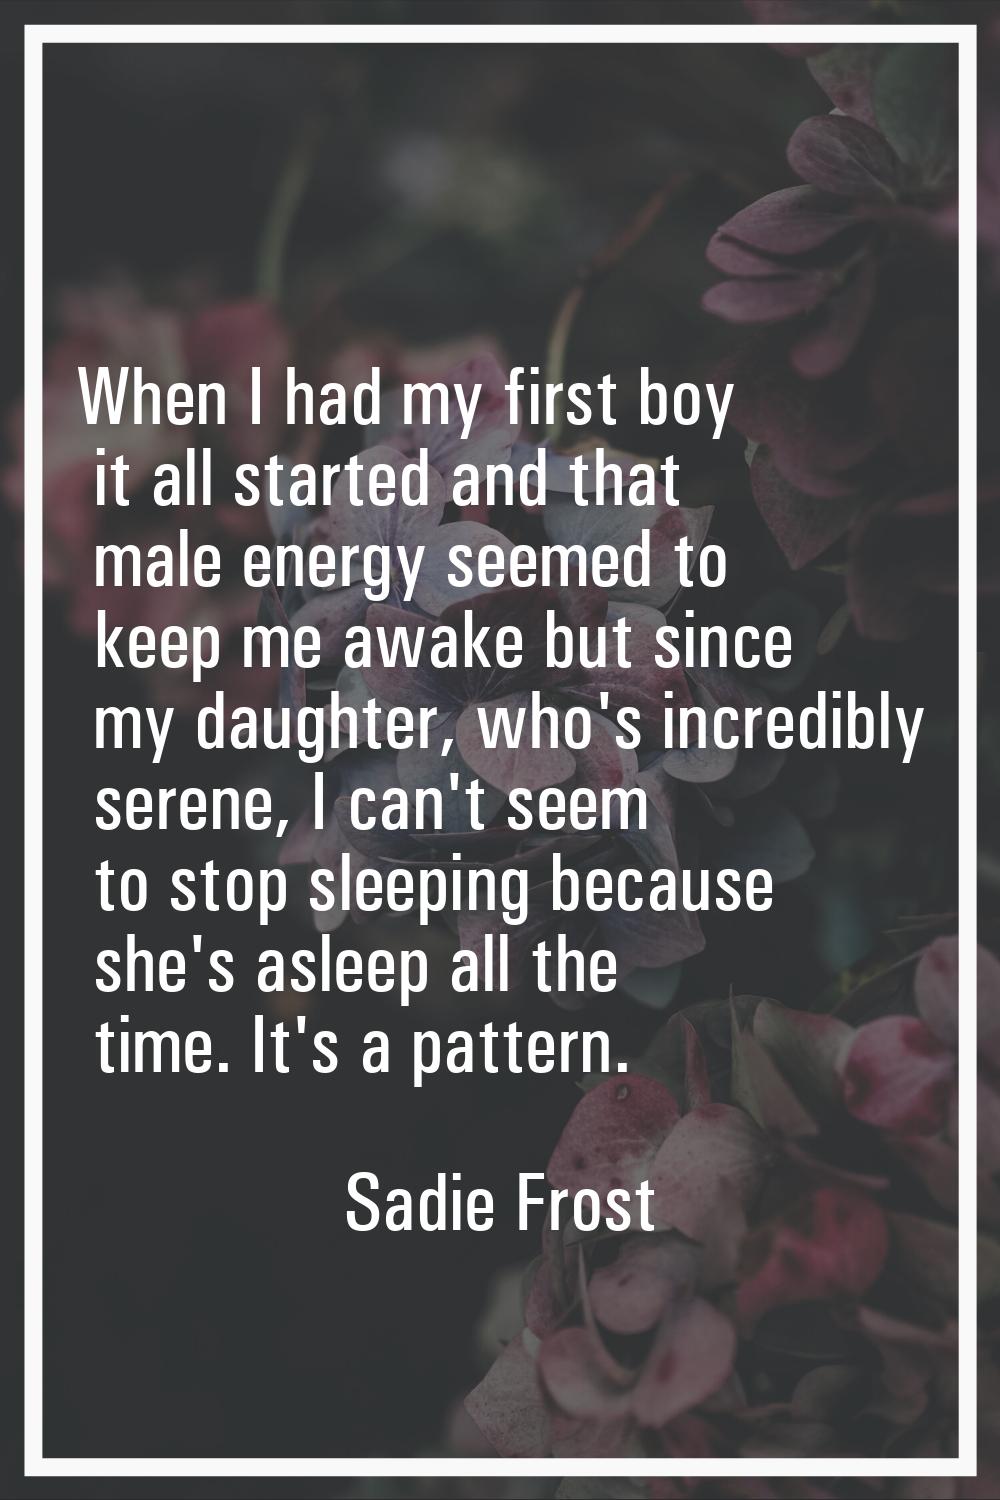 When I had my first boy it all started and that male energy seemed to keep me awake but since my da